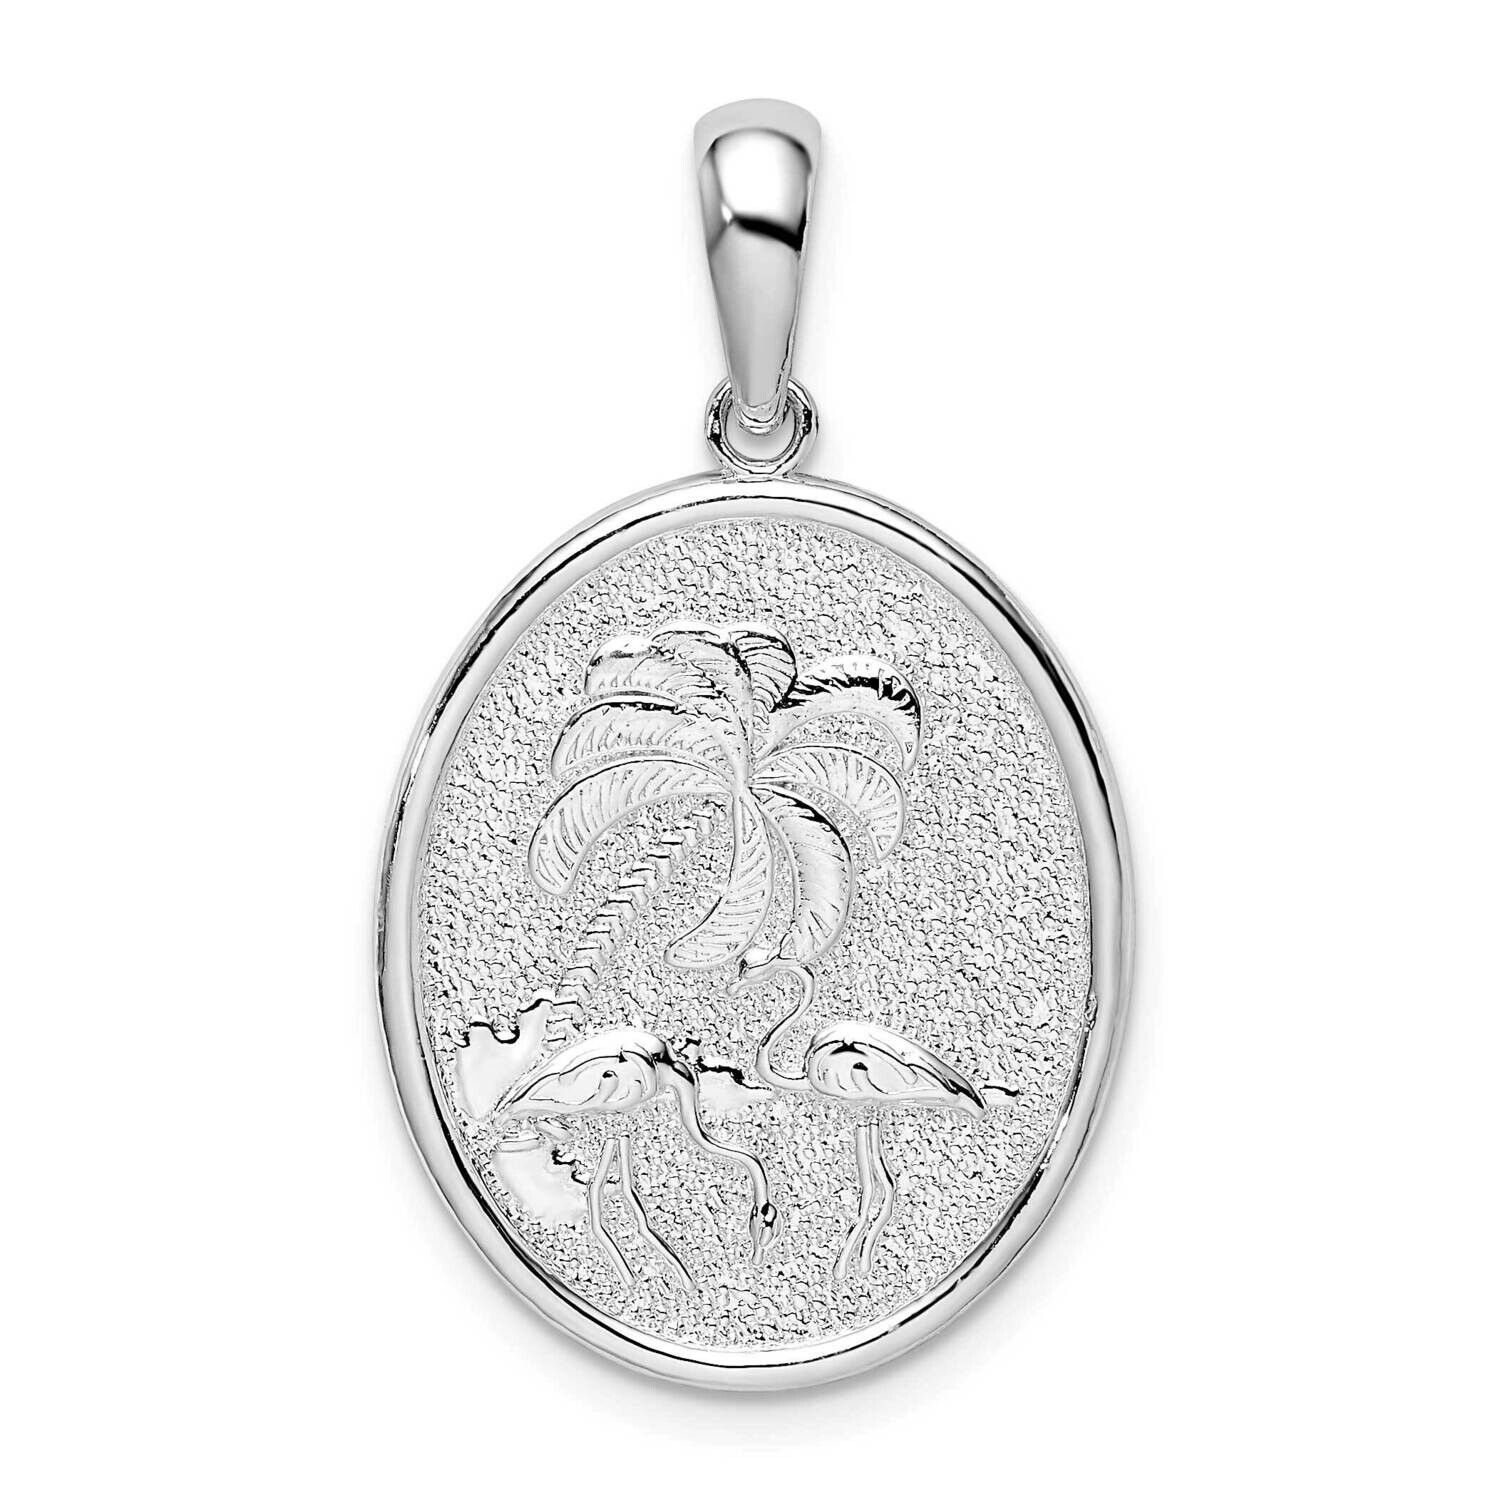 Textured Flamingos Palm Tree Oval Pendant Sterling Silver QC10358